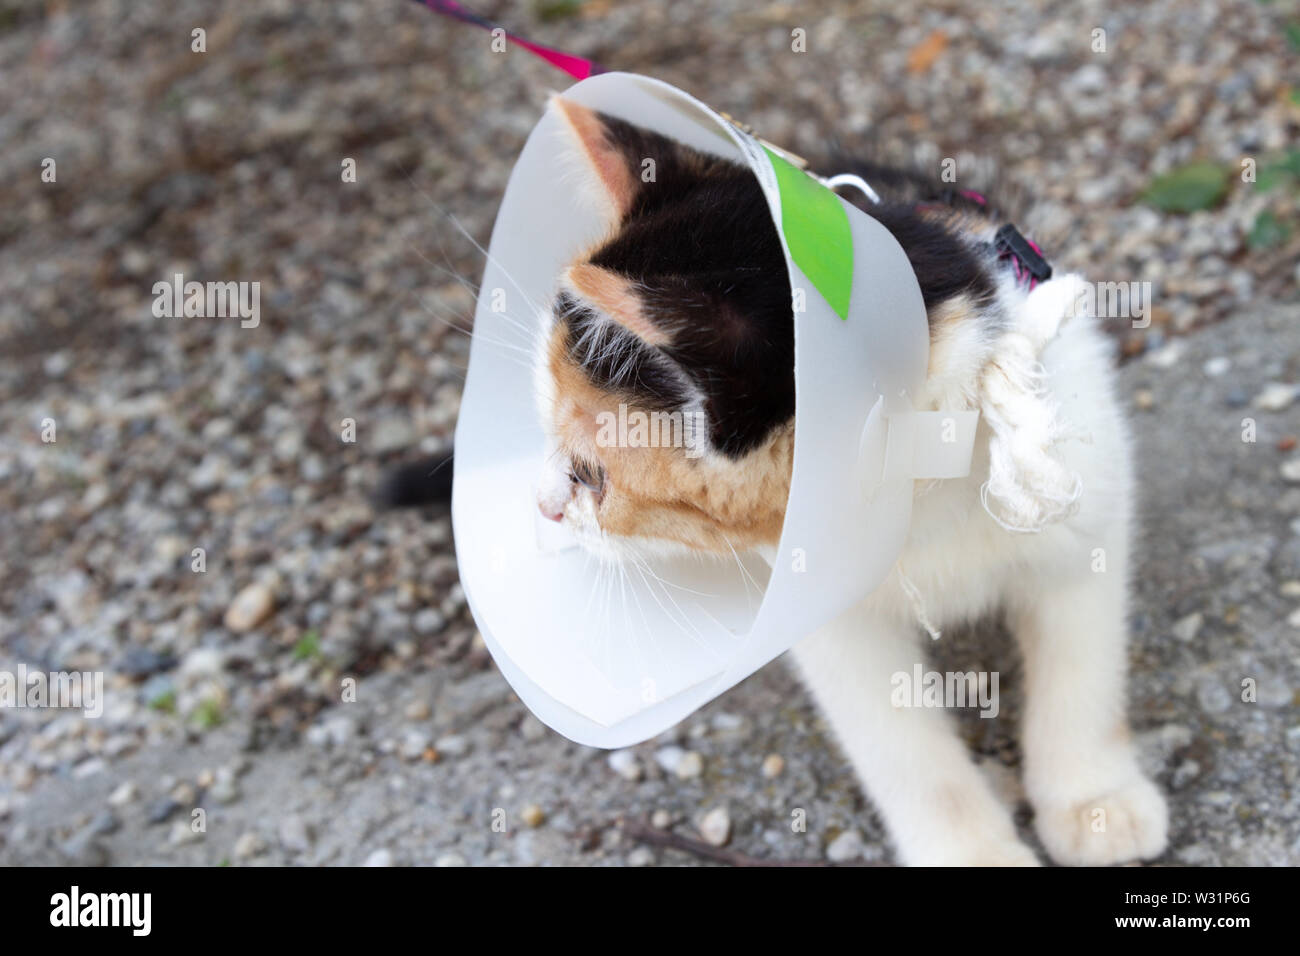 Young cat with protective collar on head Stock Photo